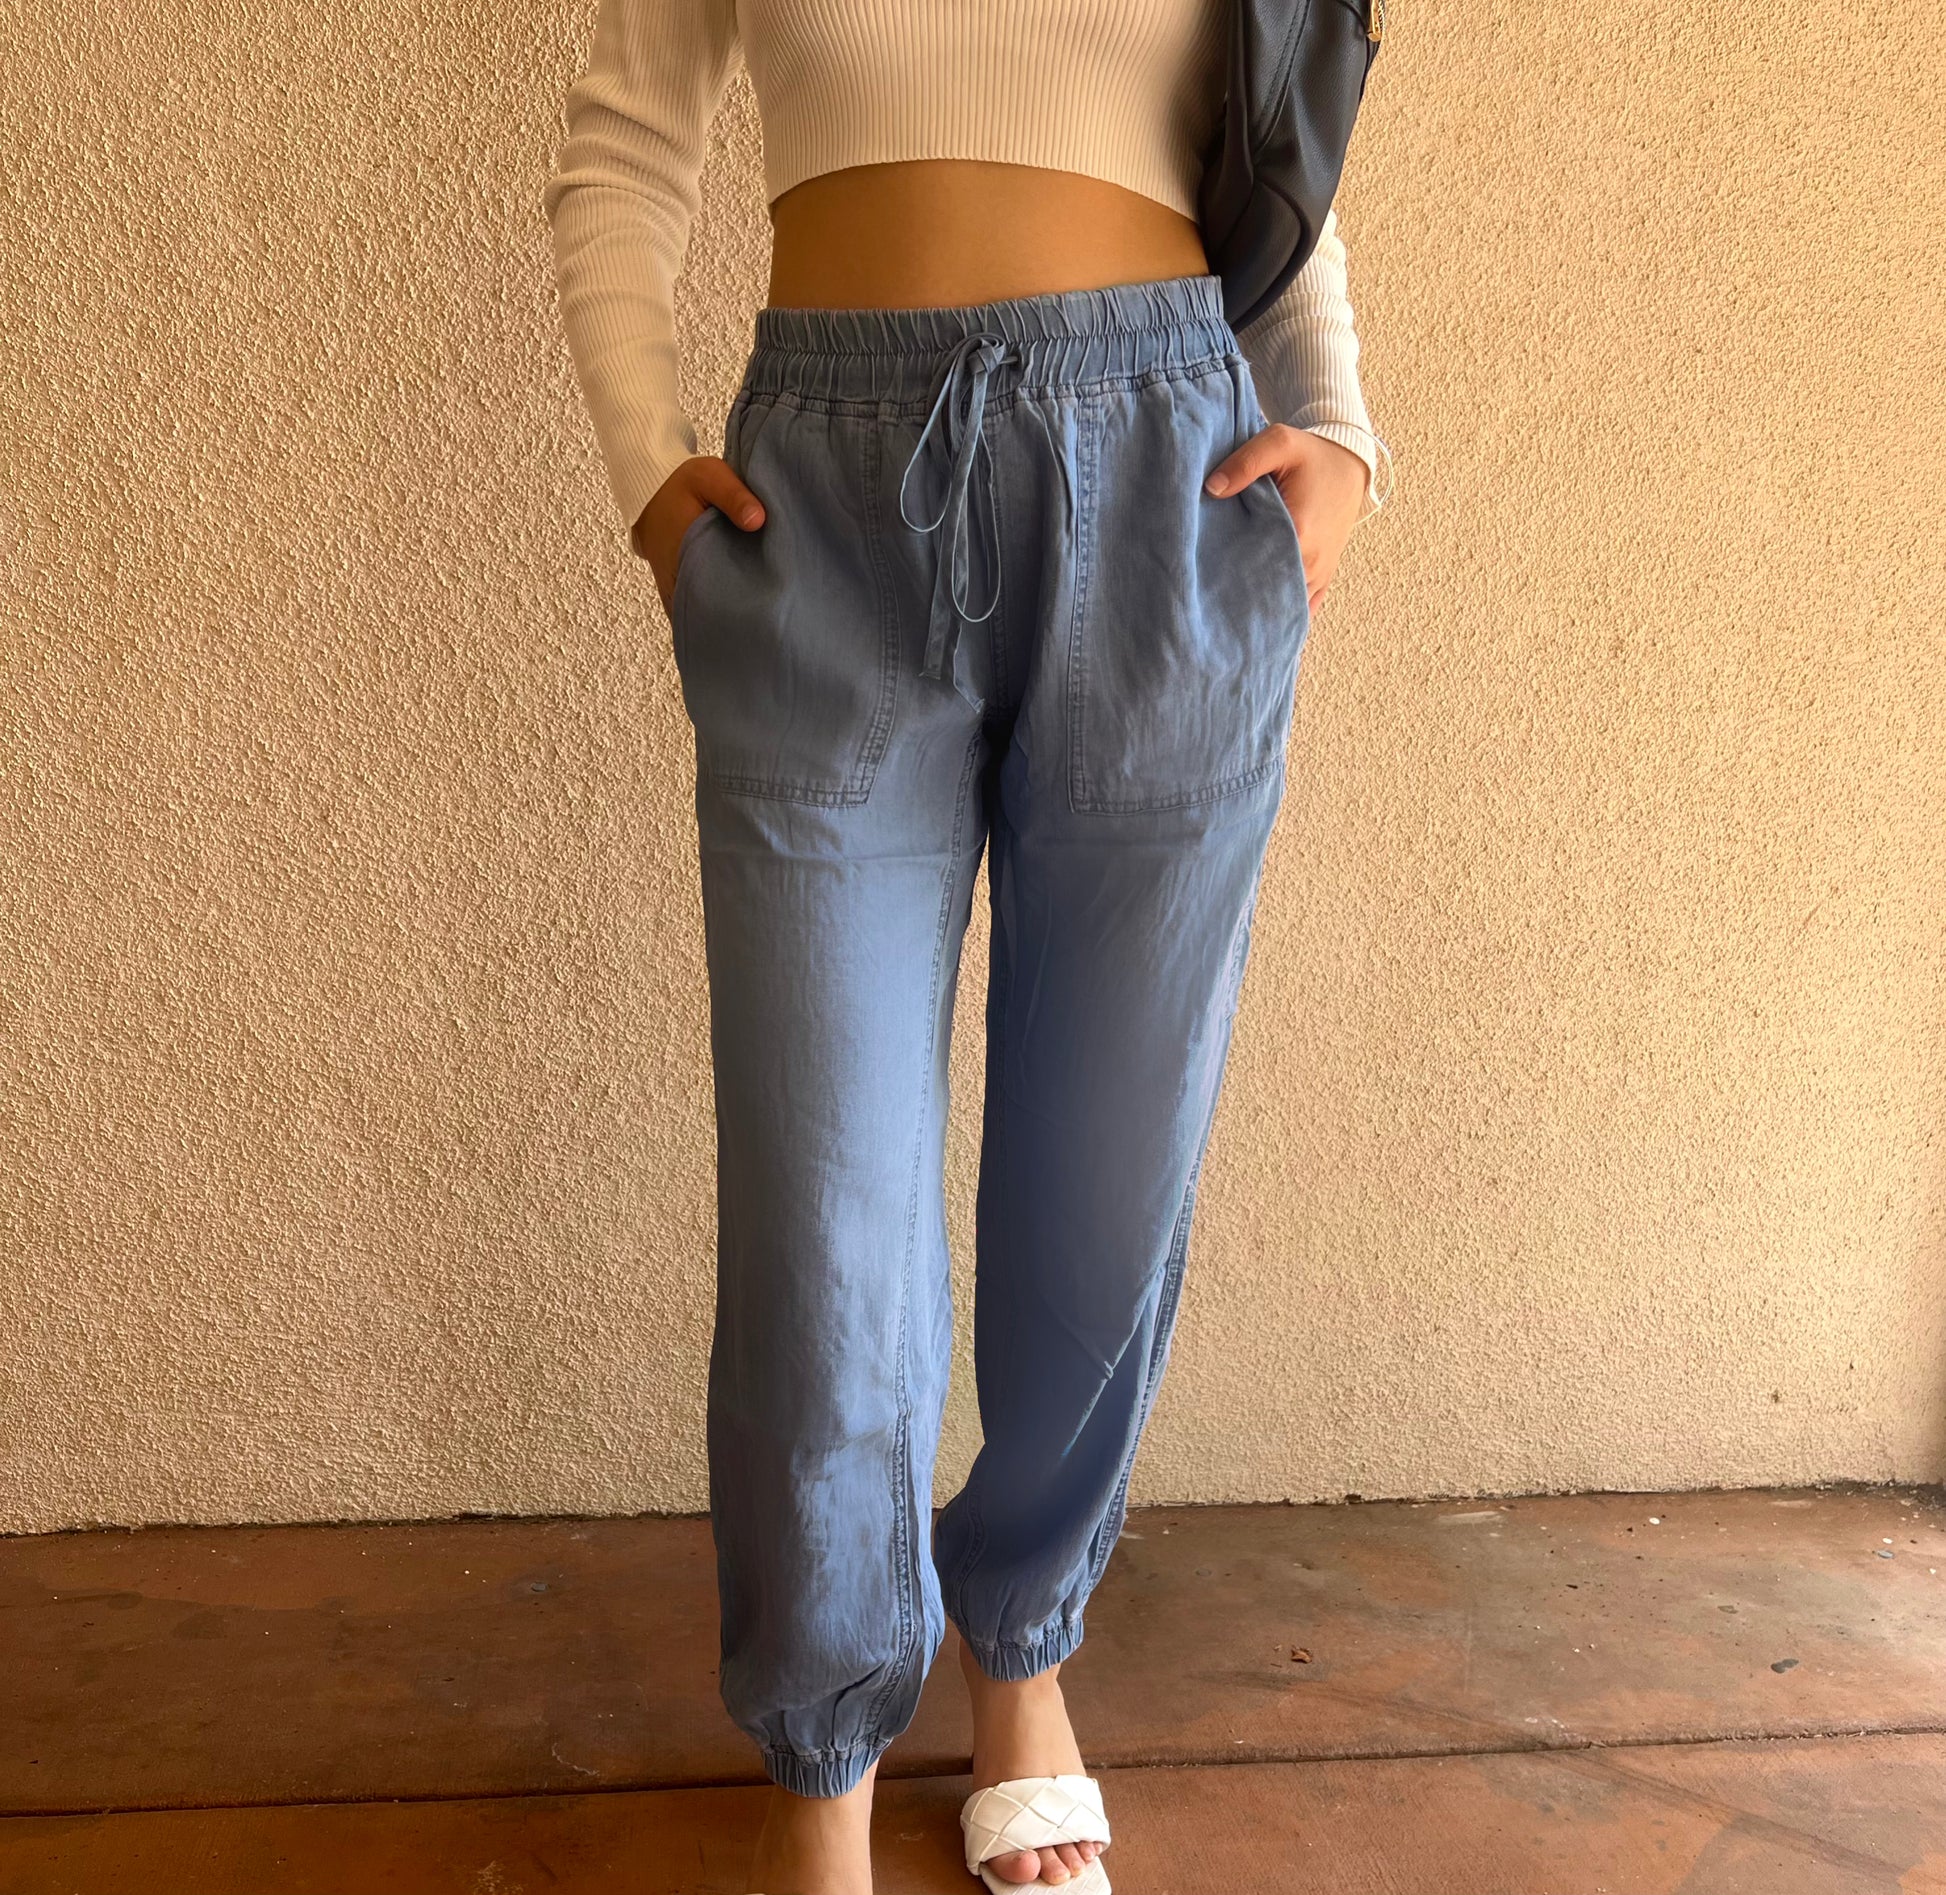 Woven Bottom Pants - Style by me